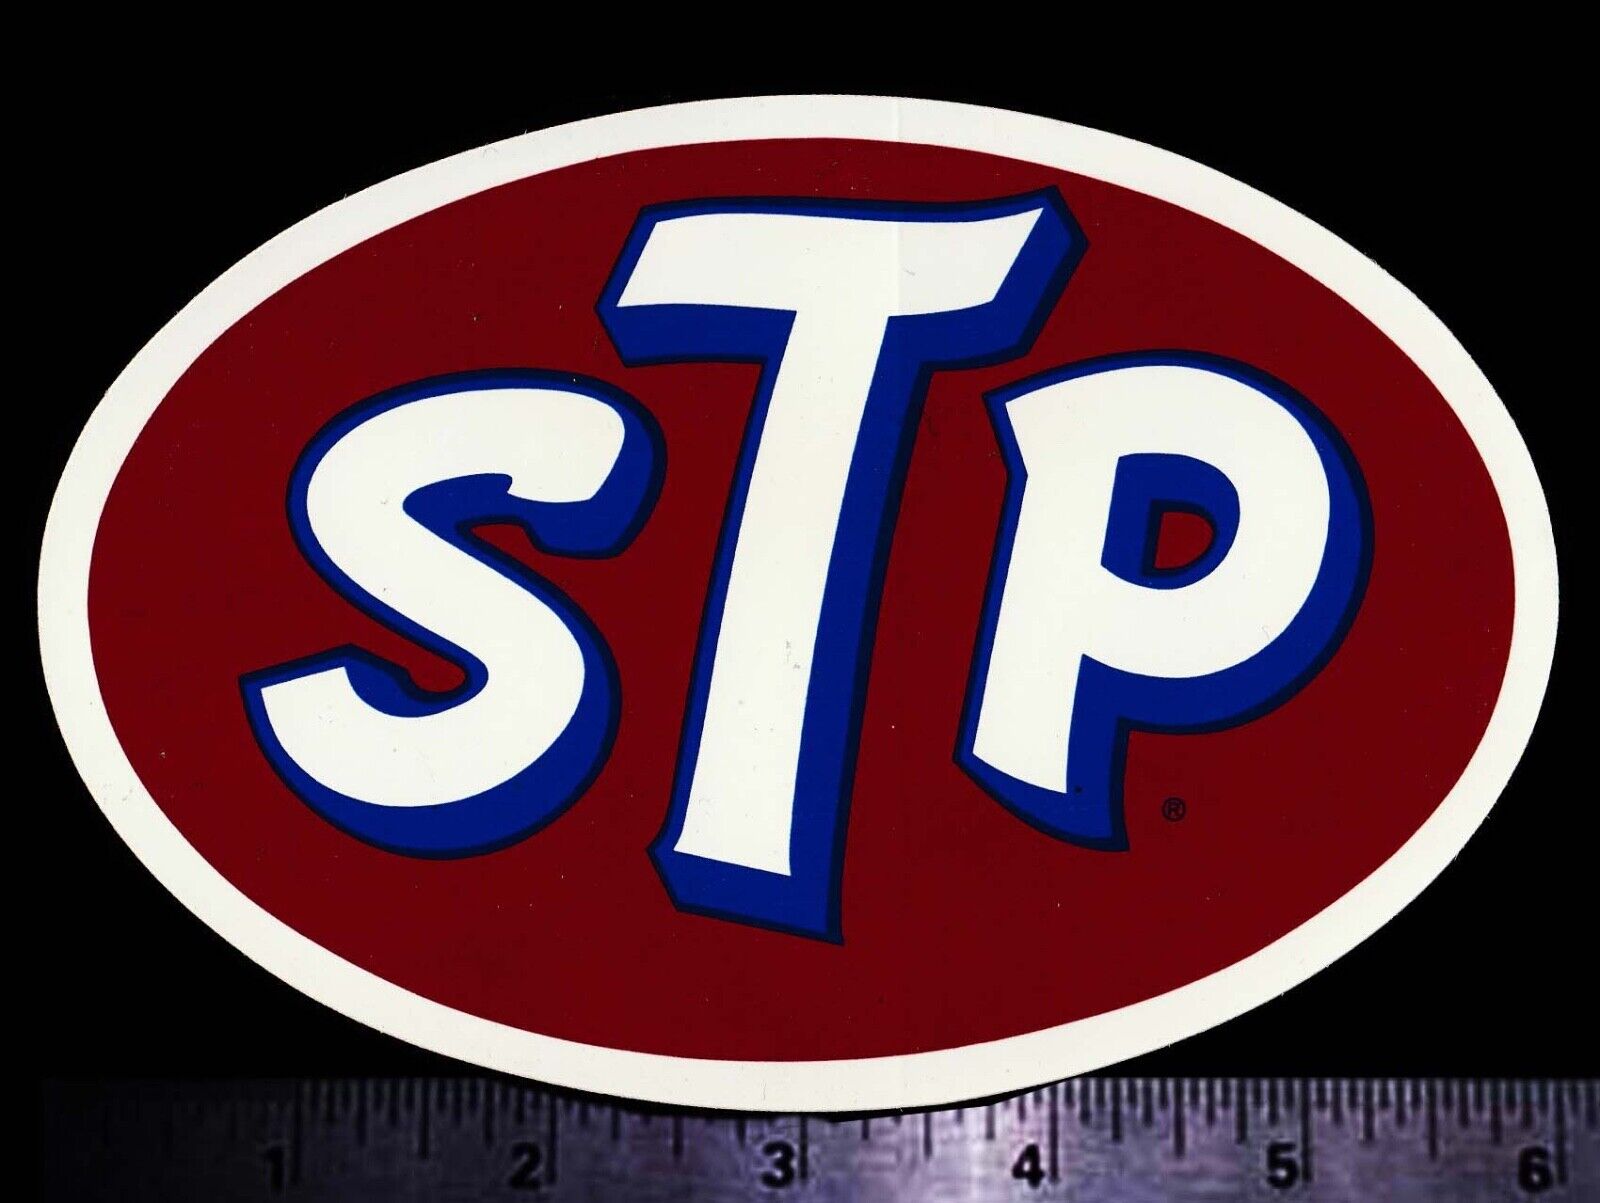 STP - Original Vintage 1970\'s 80\'s Racing Decal/Sticker - 6 Inch Size - Petty